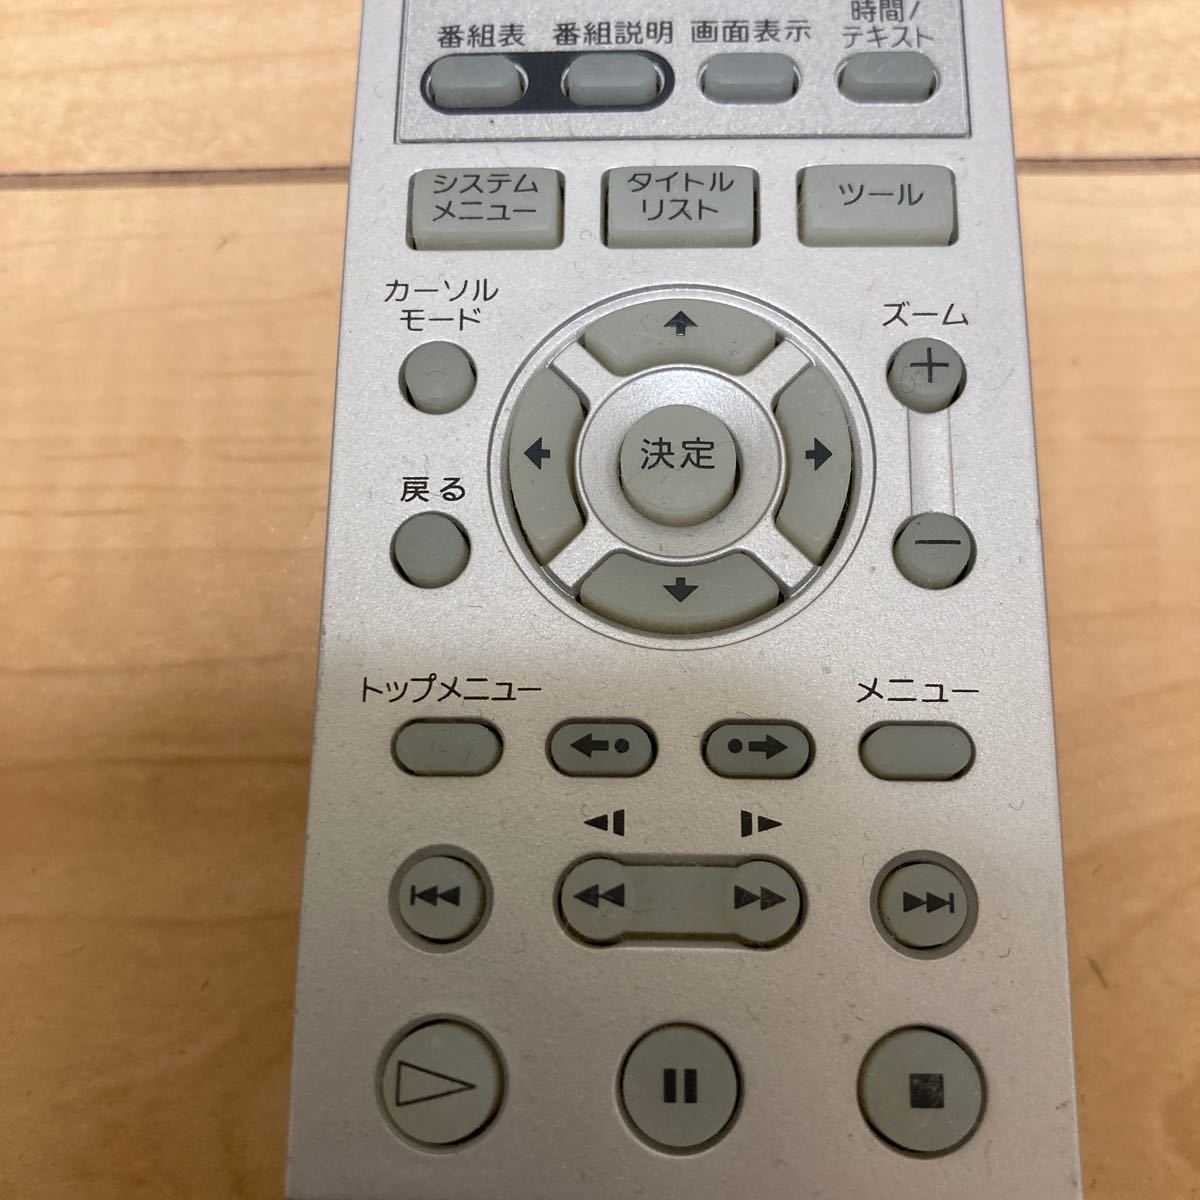 SONY Sony DVD recorder remote control RMT-D206J ②